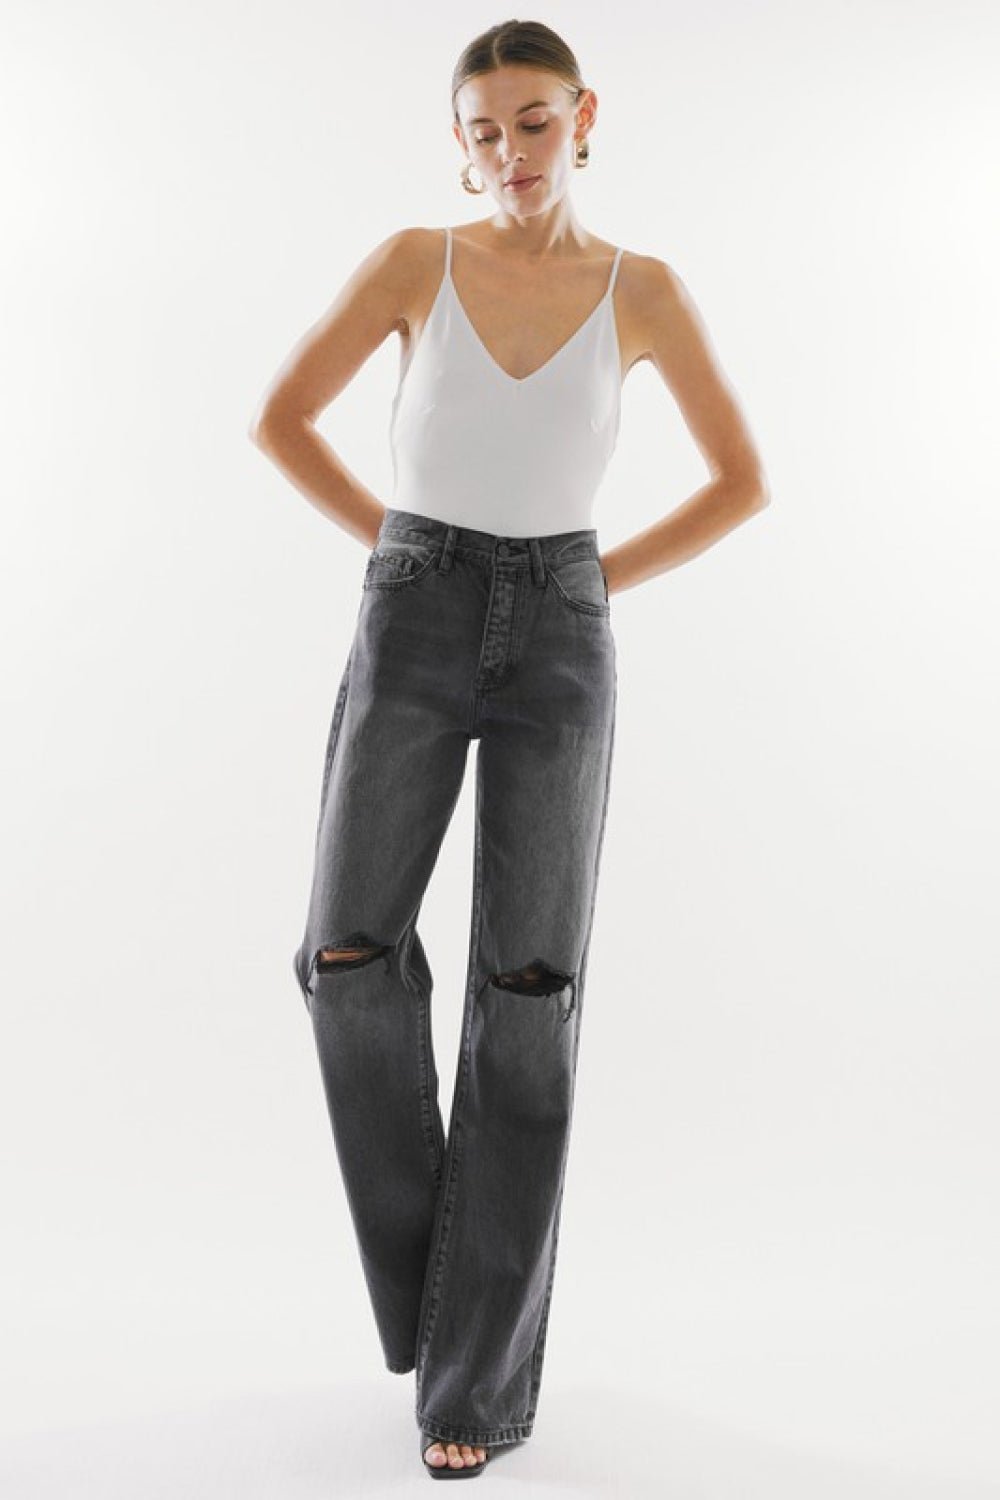 Kancan High Waist Distressed Knee Jeans - Fashion Girl Online Store